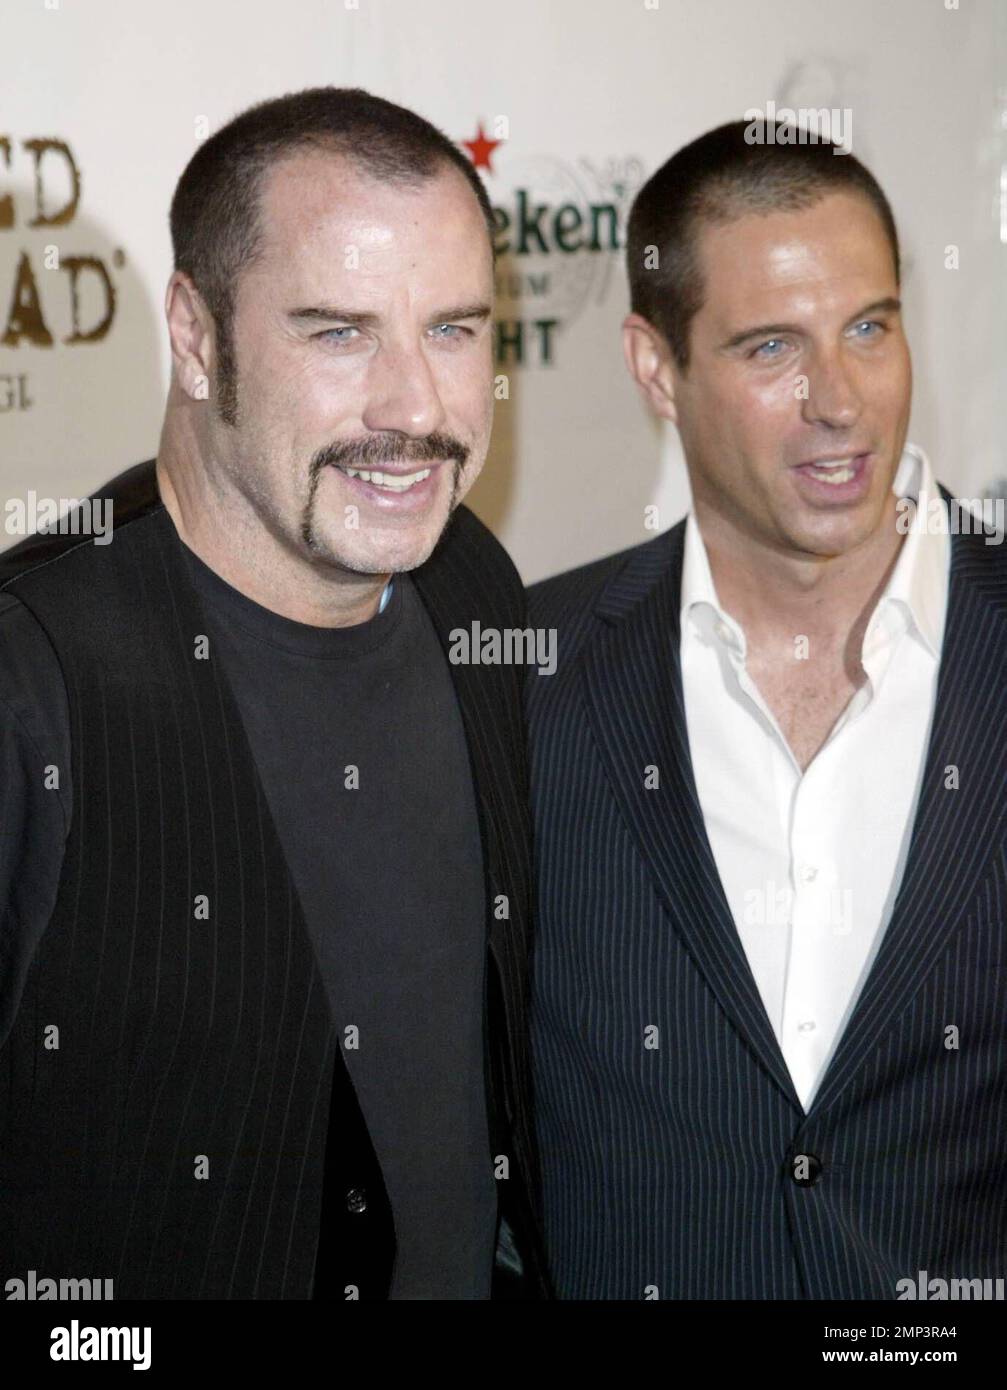 John Travolta attends Nick Loren's album release party for his debut CD 'Forever Be Cool' at Nikki Midtown. Nick Loren is the long-time stunt double for John Travolta and most recently appeared opposite Robin Williams in Disney's 'Old Dogs' due out in 2009. New York, NY. 6/6/08. Stock Photo